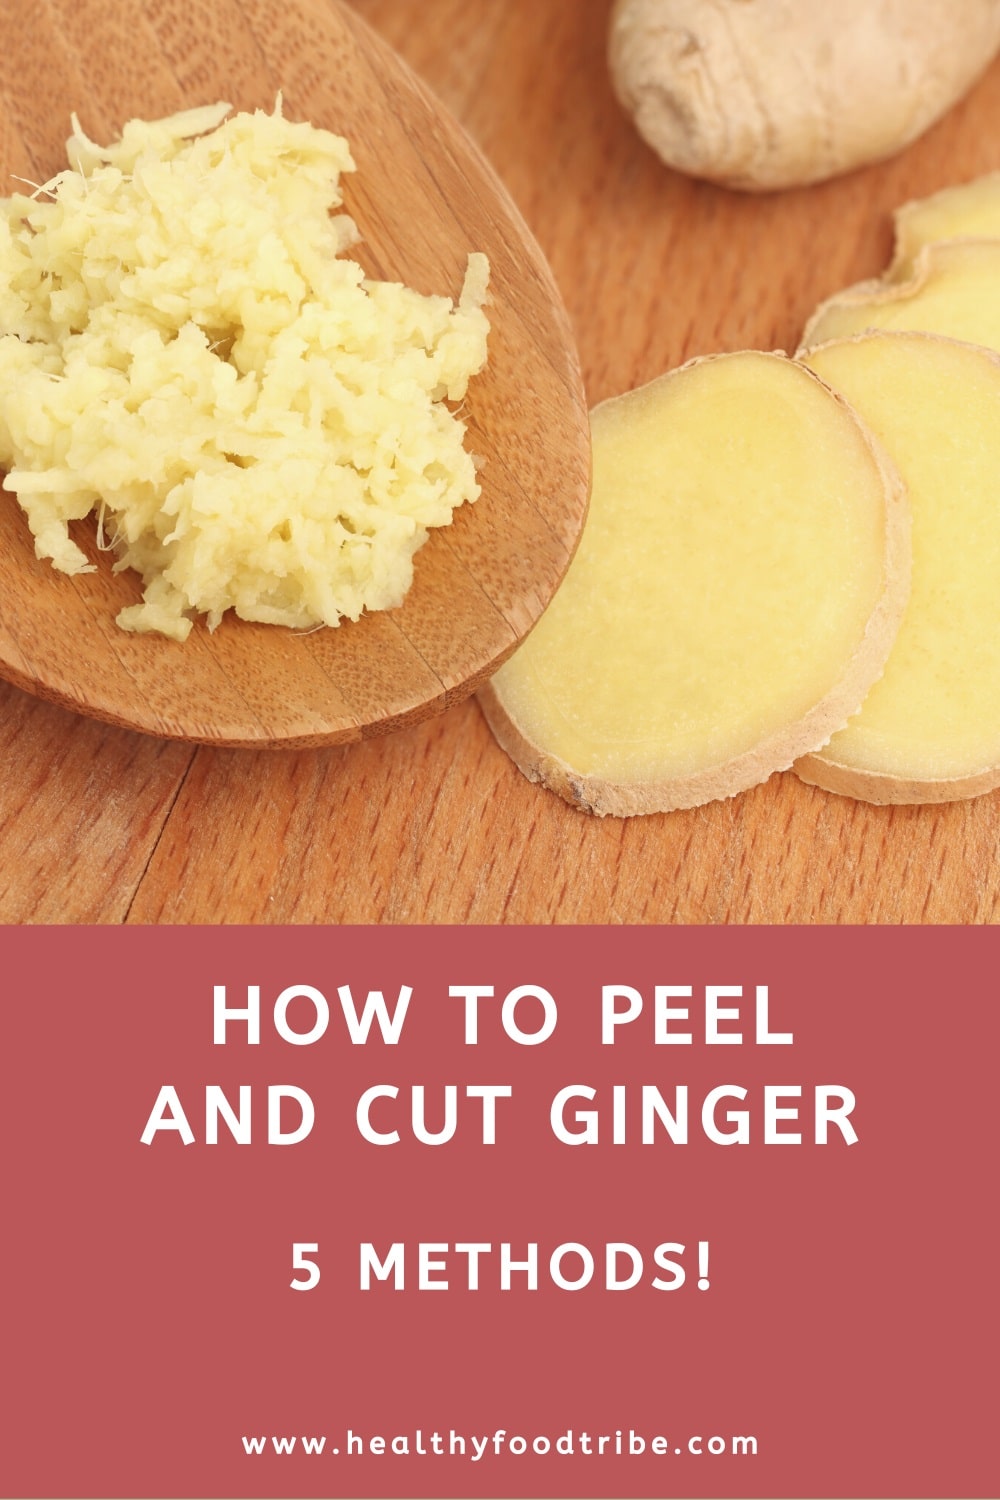 How to peel and cut ginger (5 methods)